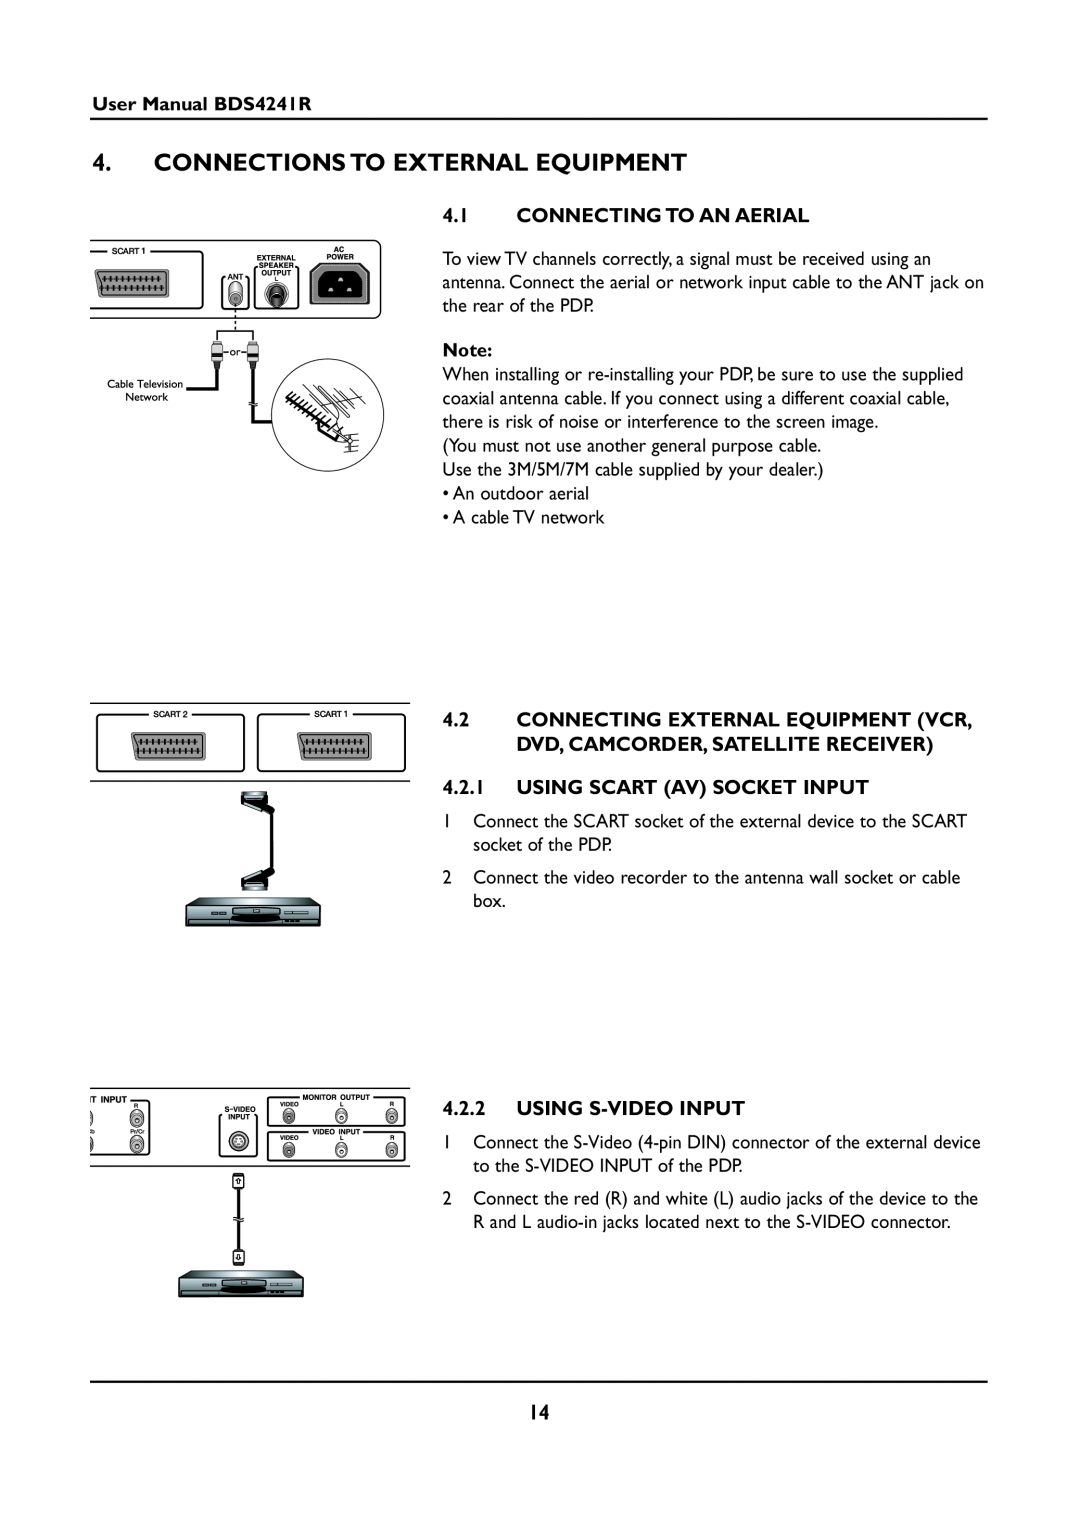 Philips BDS4241R/00 manual Connections To External Equipment, Connecting To An Aerial, Using Scart Av Socket Input 